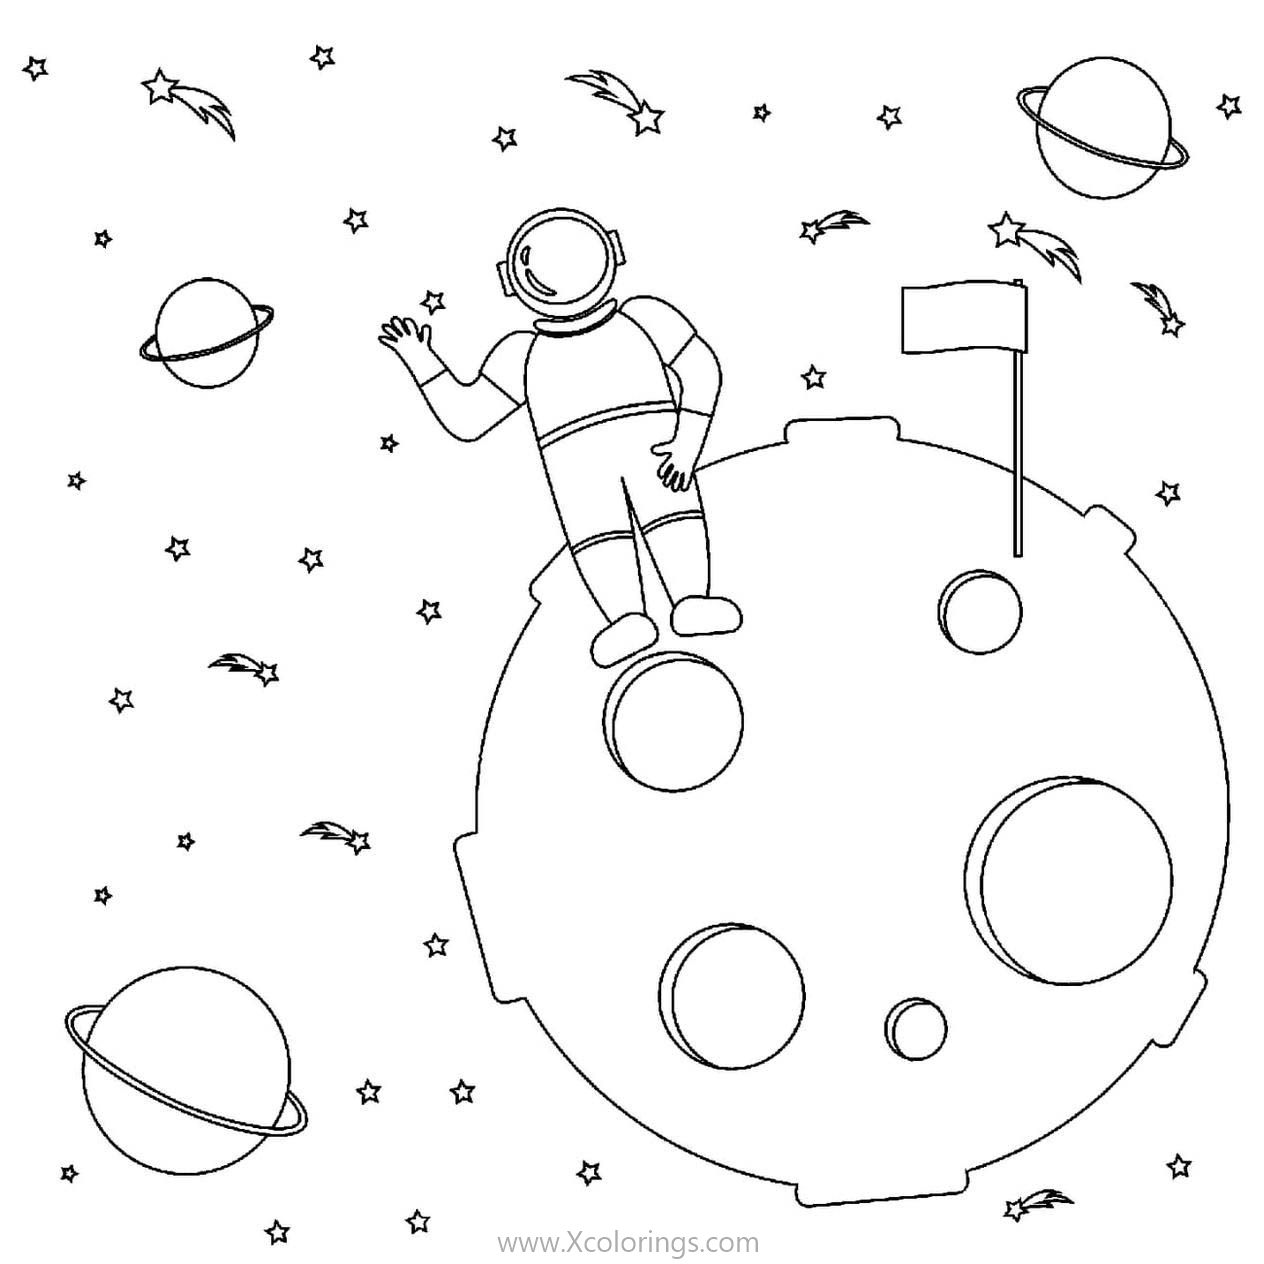 Free Astronaut Coloring Pages for 3 Years Old Children printable